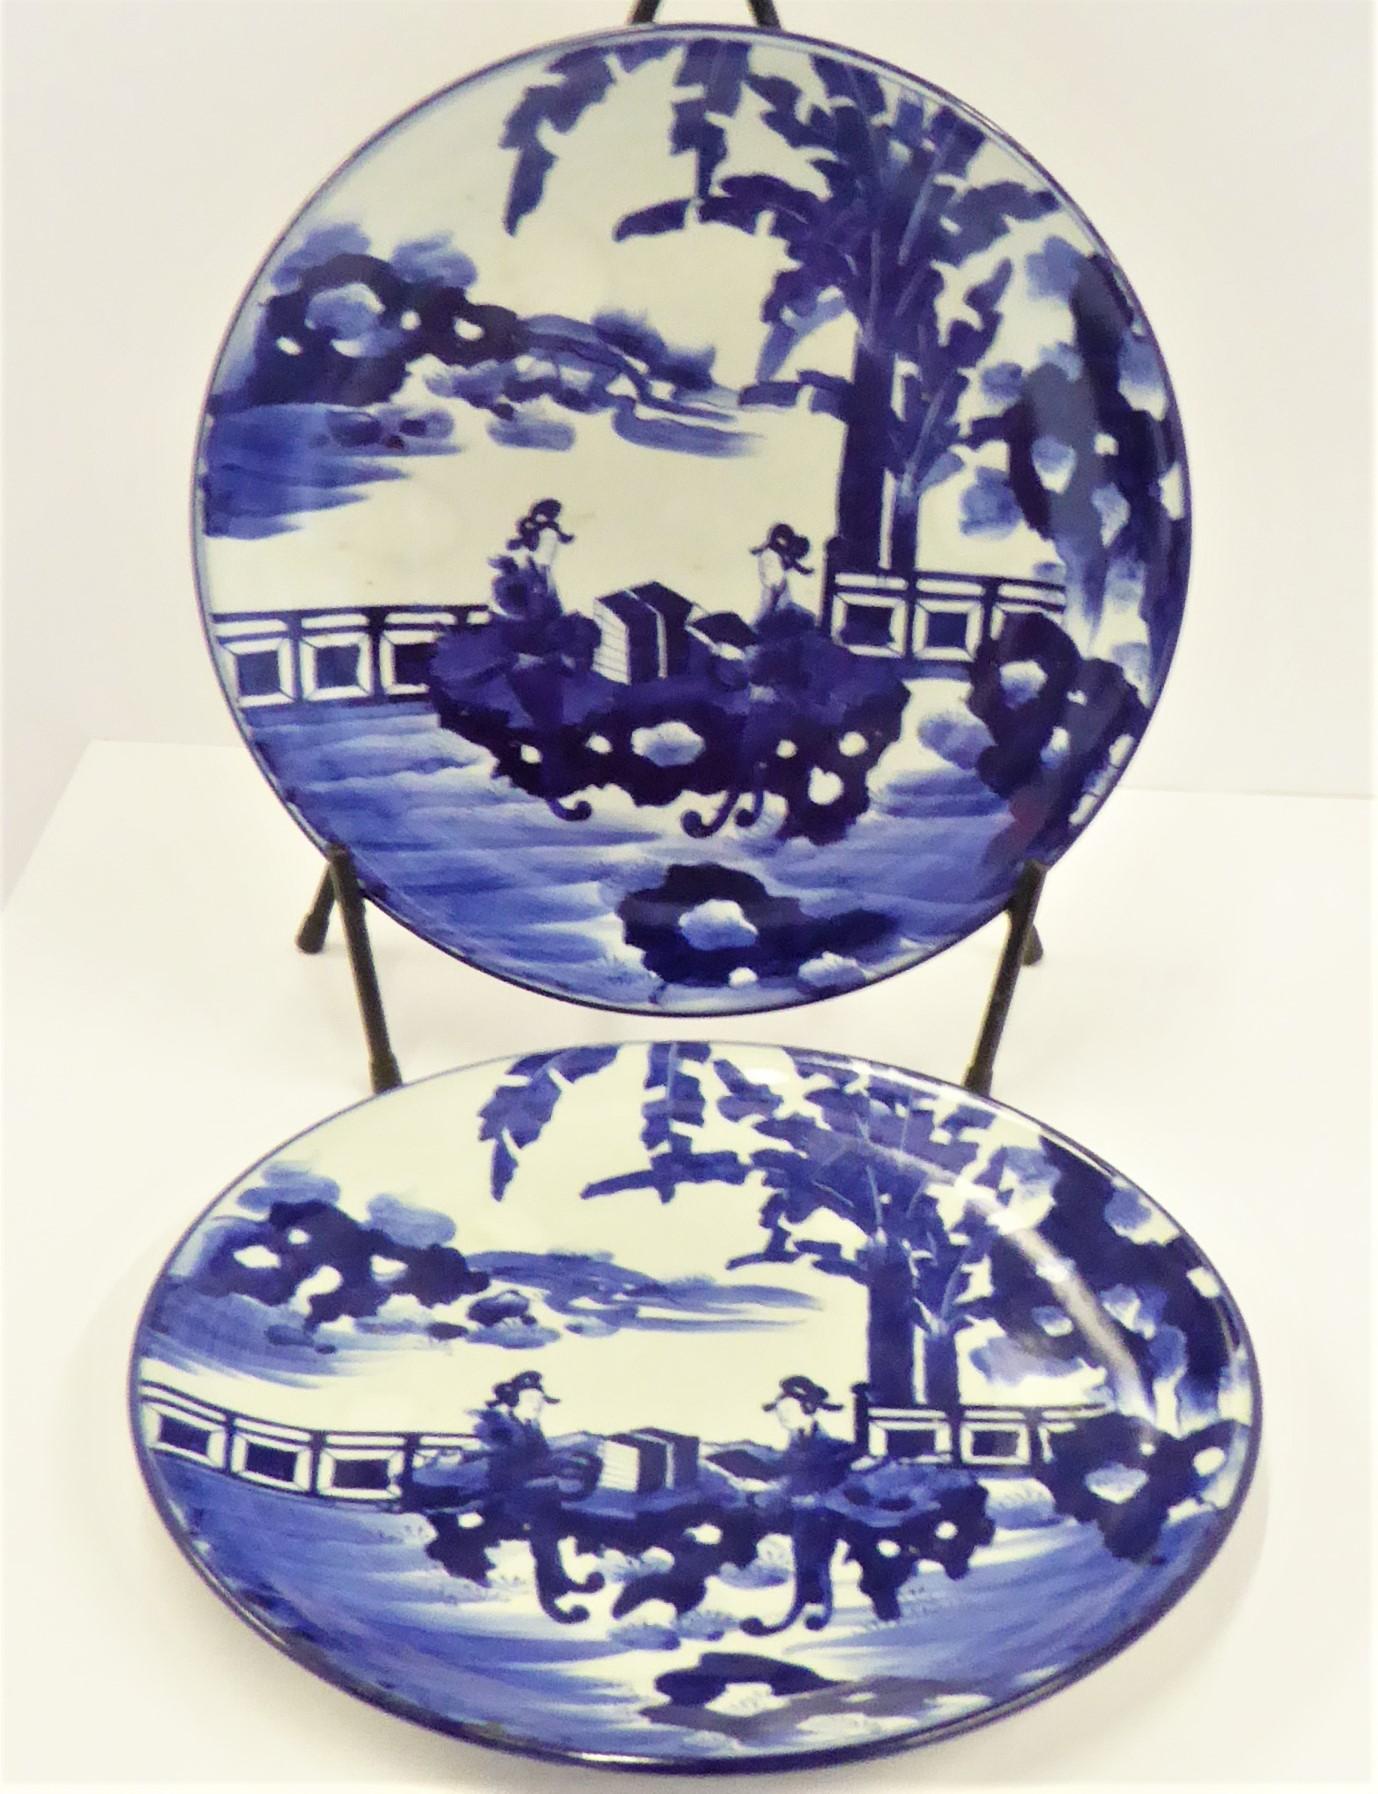 Beautiful pair of Meiji Period blue and white Japanese Imari Chargers depicting two Japanese Courtesans reading poetry by a lake in a serene setting framed by banana palms or trees on one side of background. Matching in design, both platters have